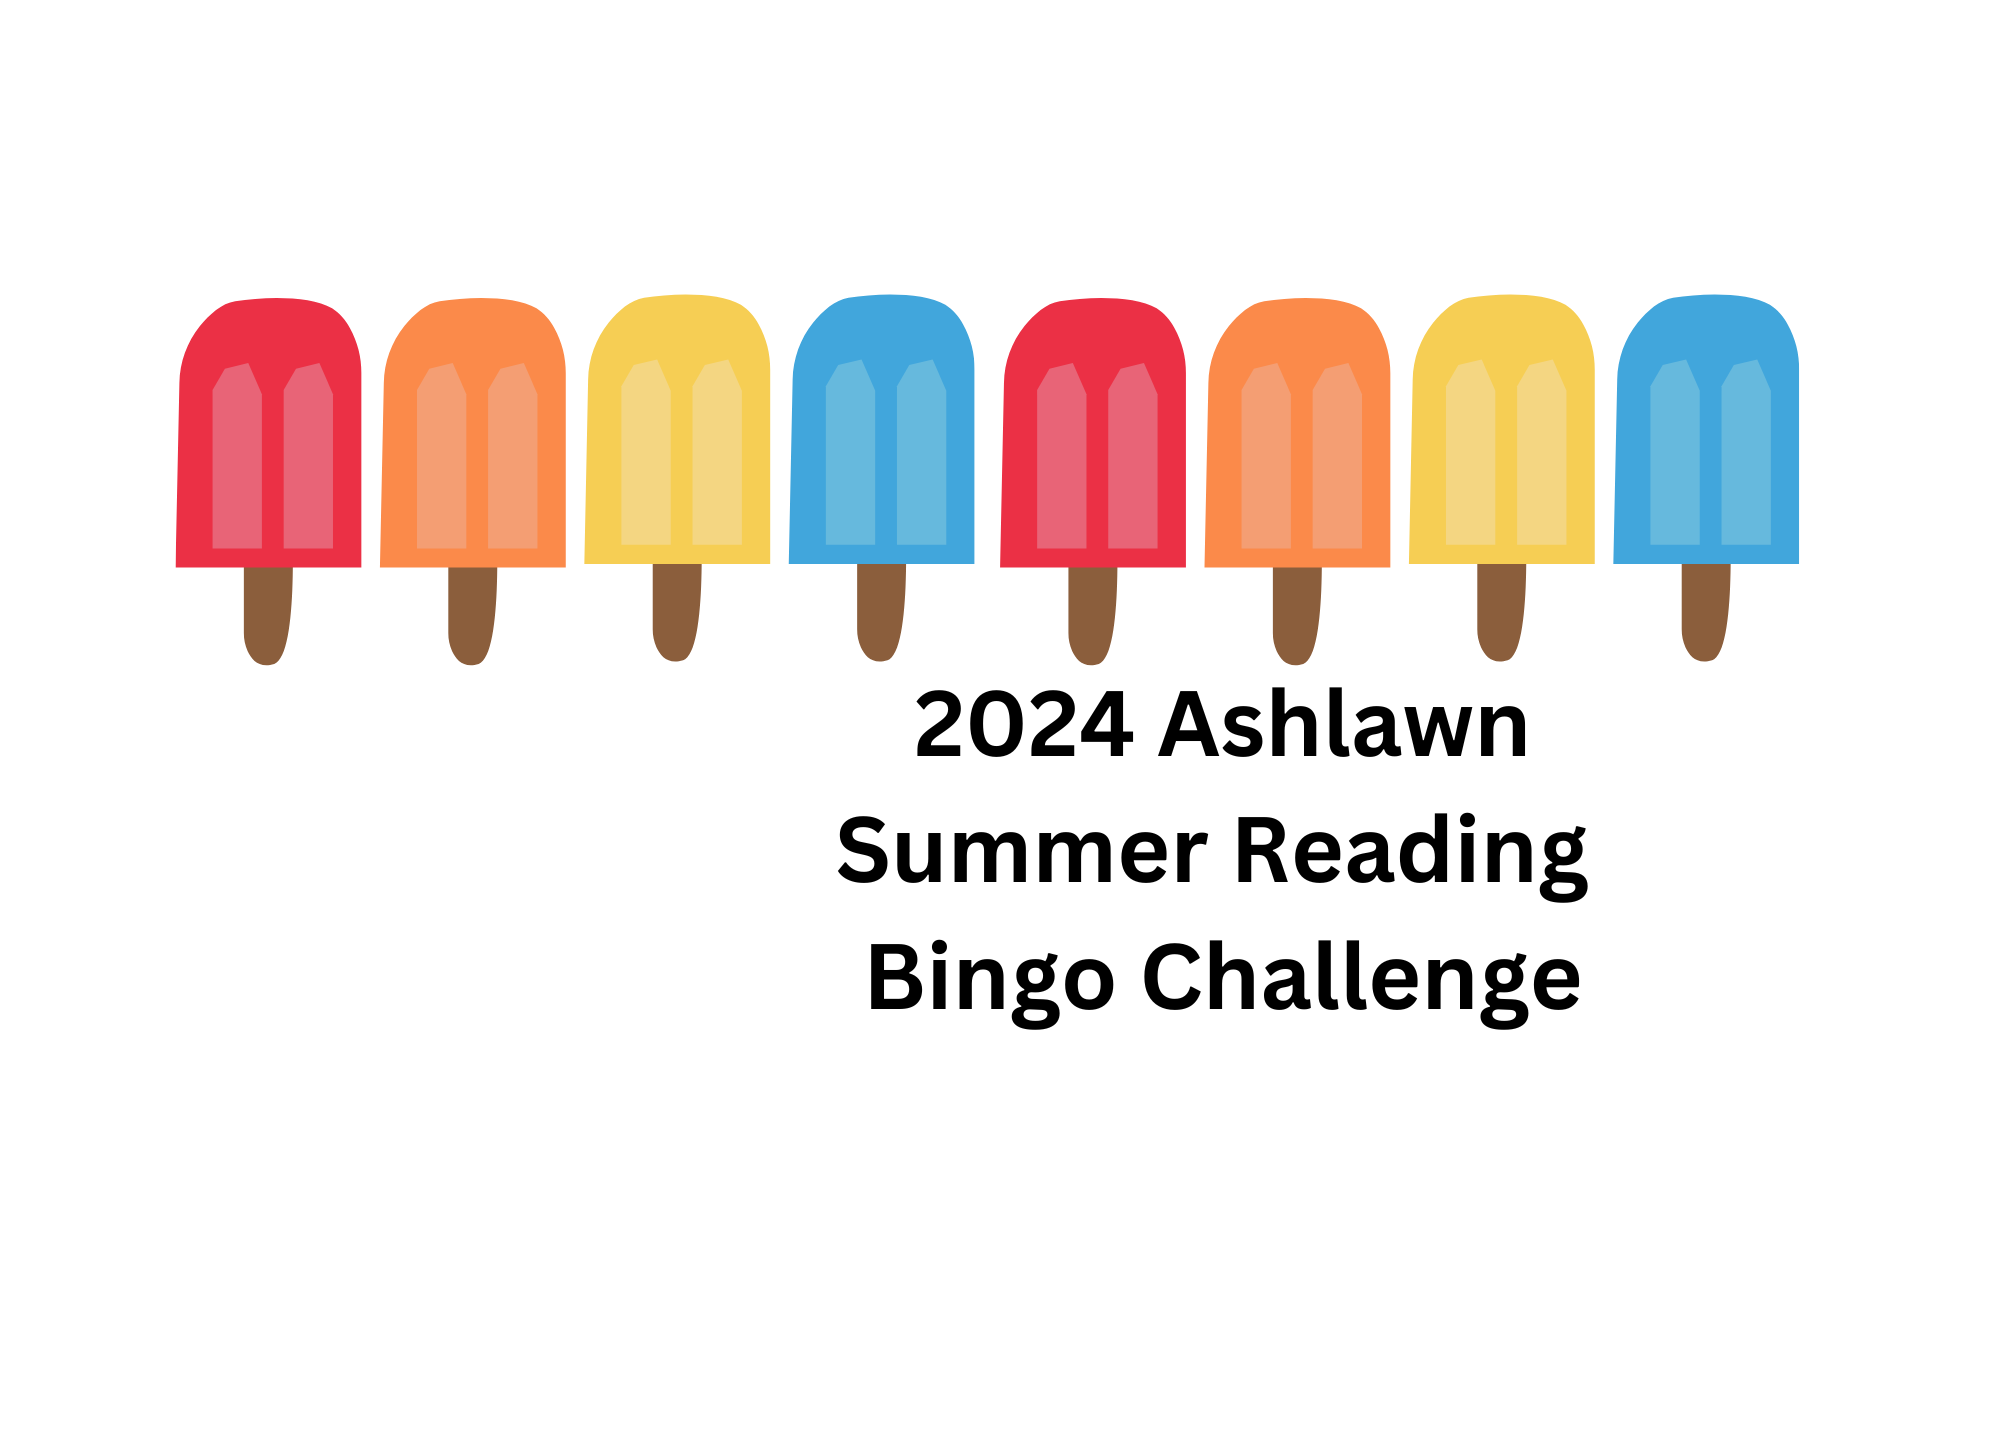 Picture of popsicles - Ashlawn 2024 Summer Reading Bingo Challenge